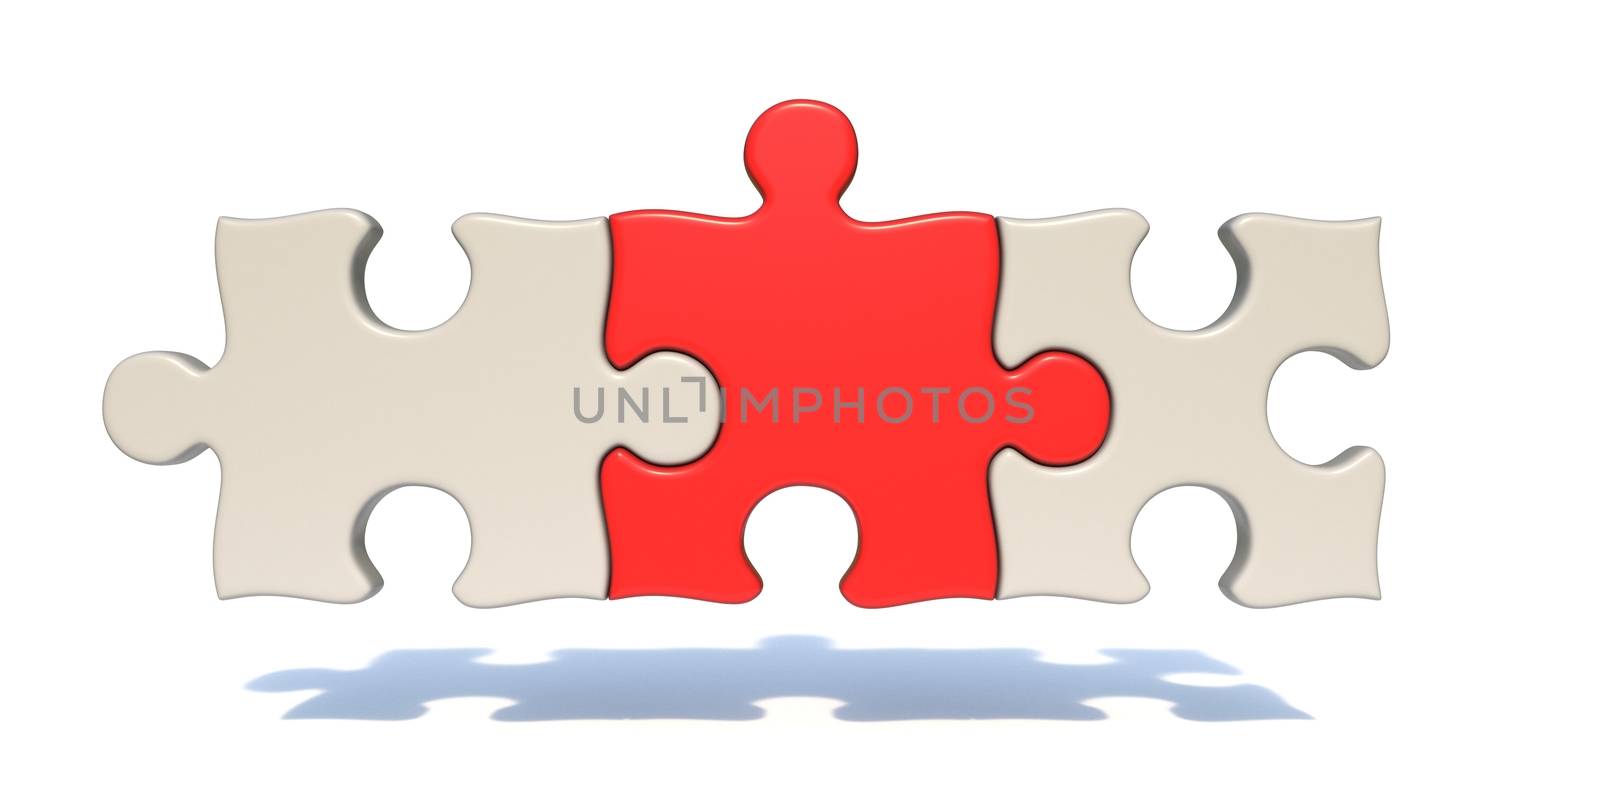 Three puzzle pieces middle one is red 3D rendering illustration isolated on white background